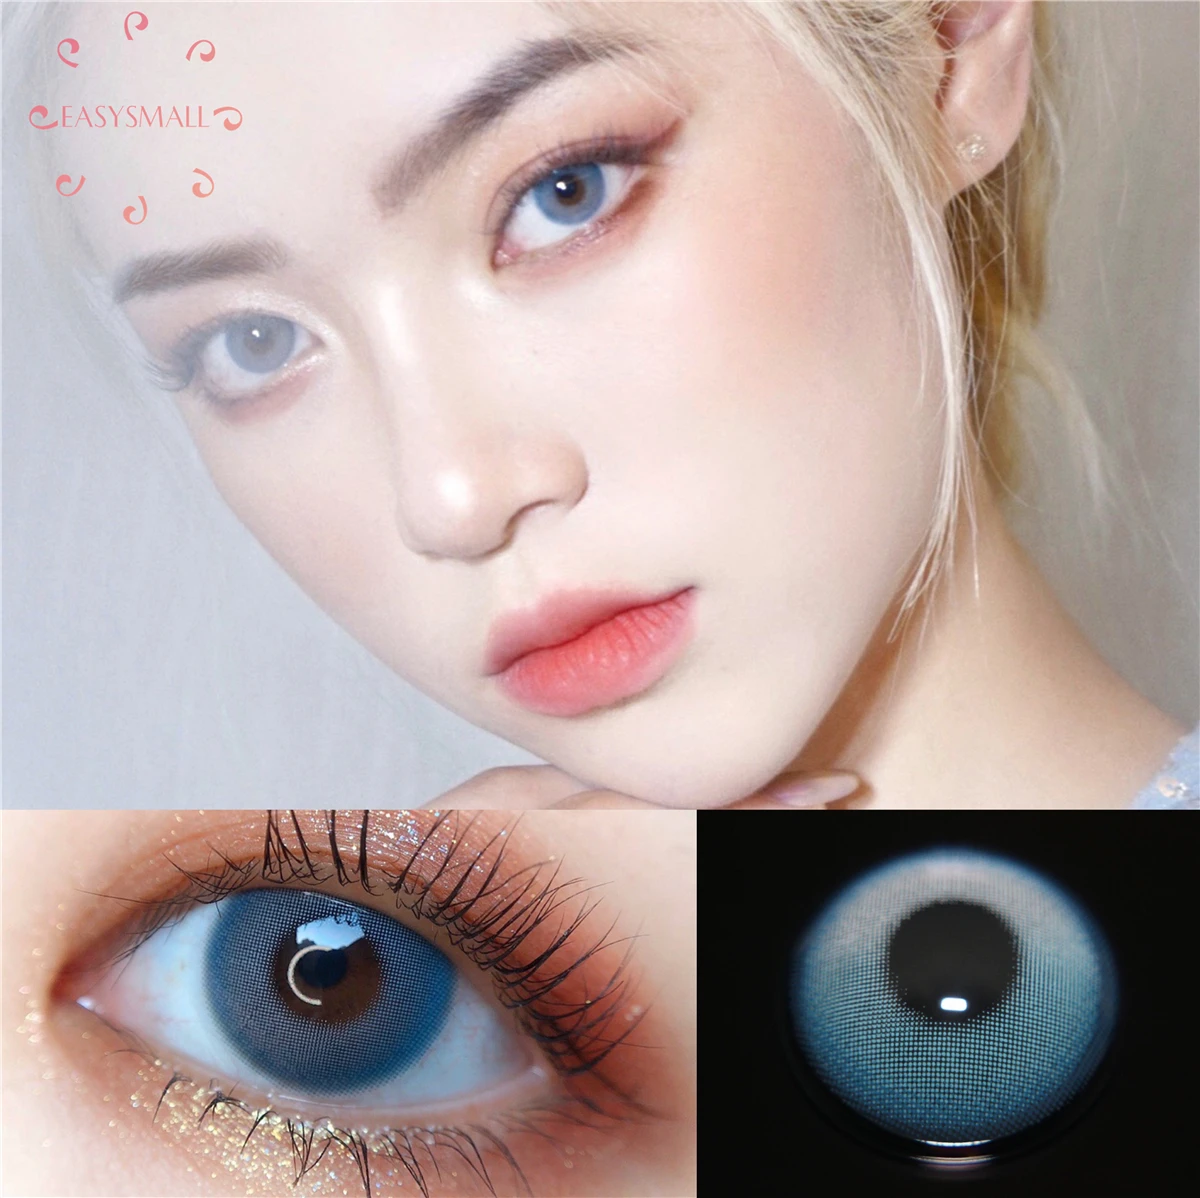 

Easysmall sunset blue unique High-end small beauty pupil for Eyes Colored Contact Lenses Cosmetic 2pcs/pair prescription myopia